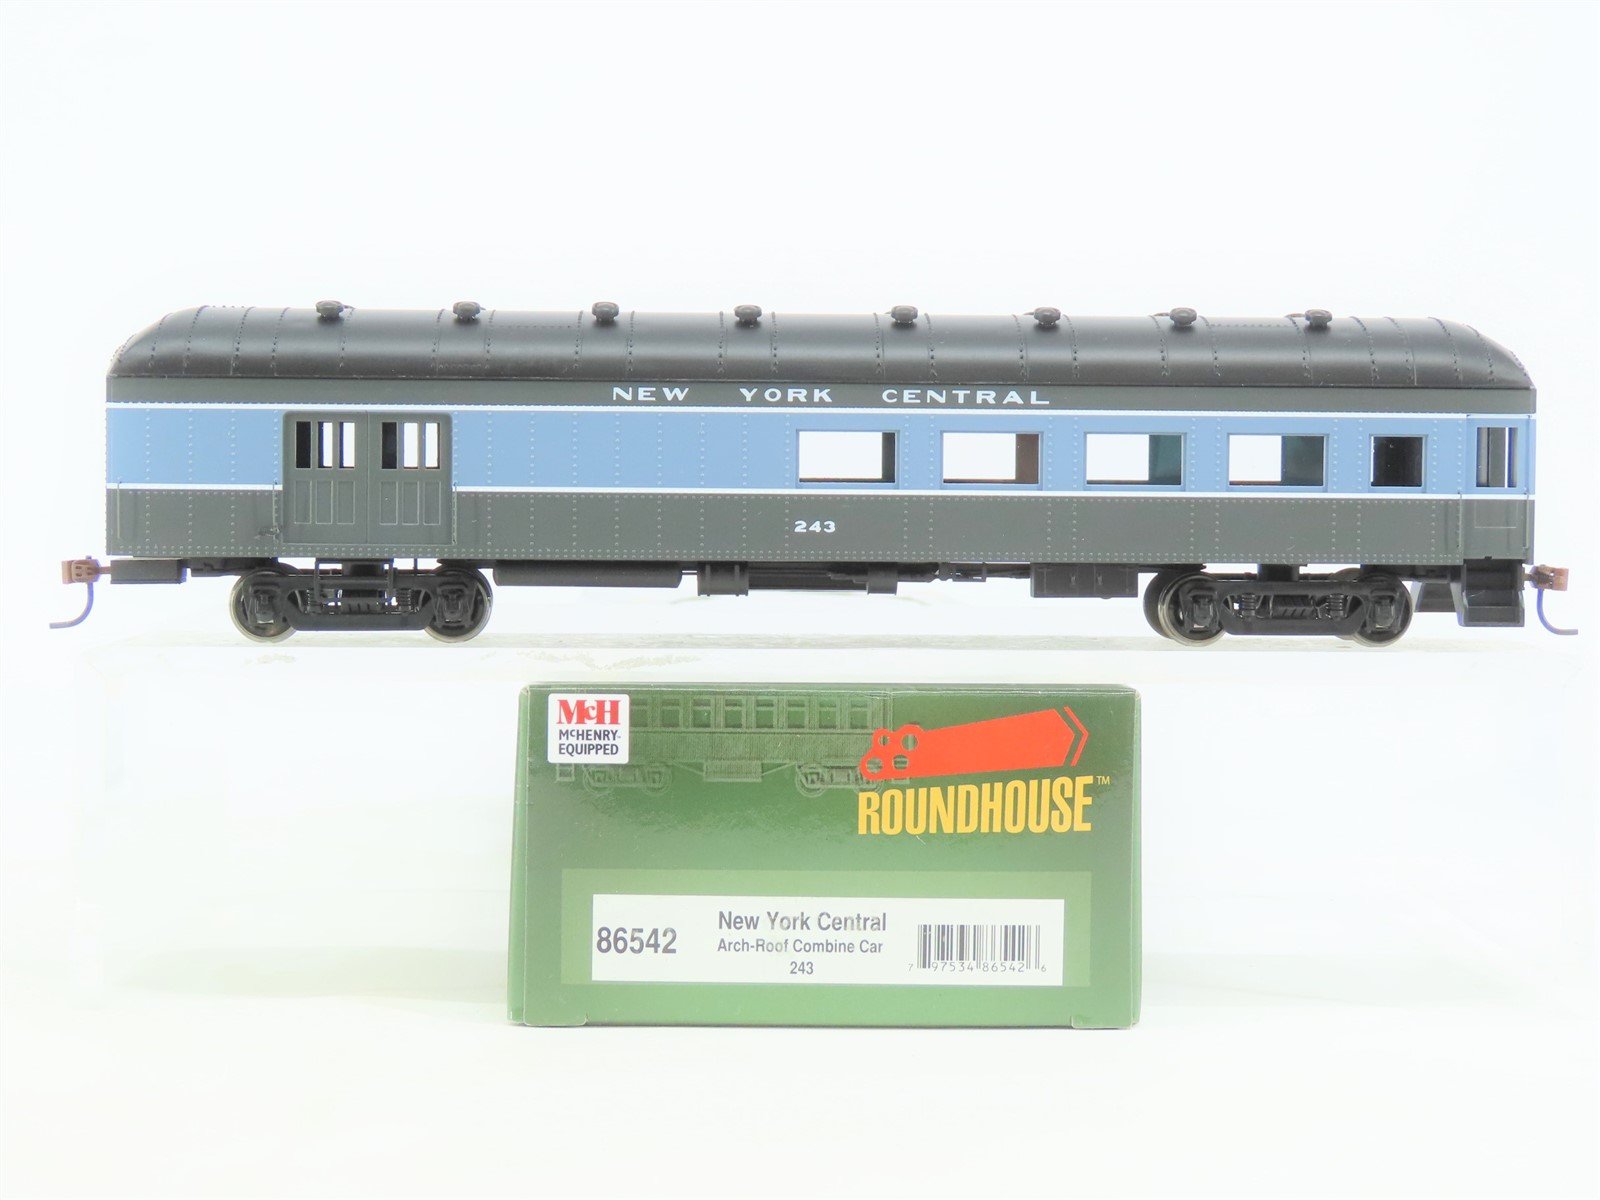 HO Scale Roundhouse 86542 NYC New York Central Arch-Roof Combine Passenger #243